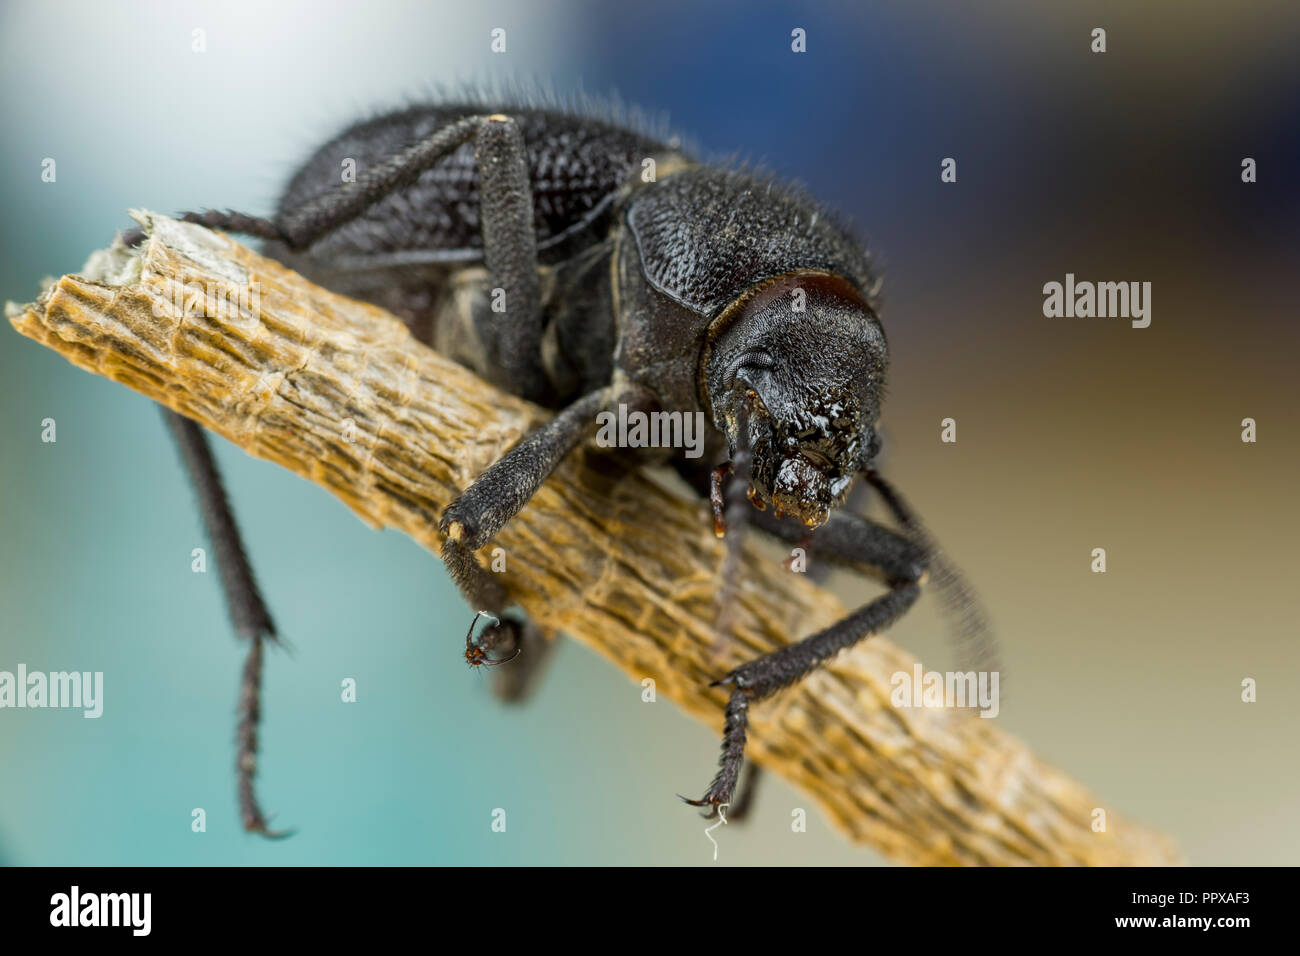 Black Scarab Beetle found in a garden between sand and dead leaves, Stock Photo